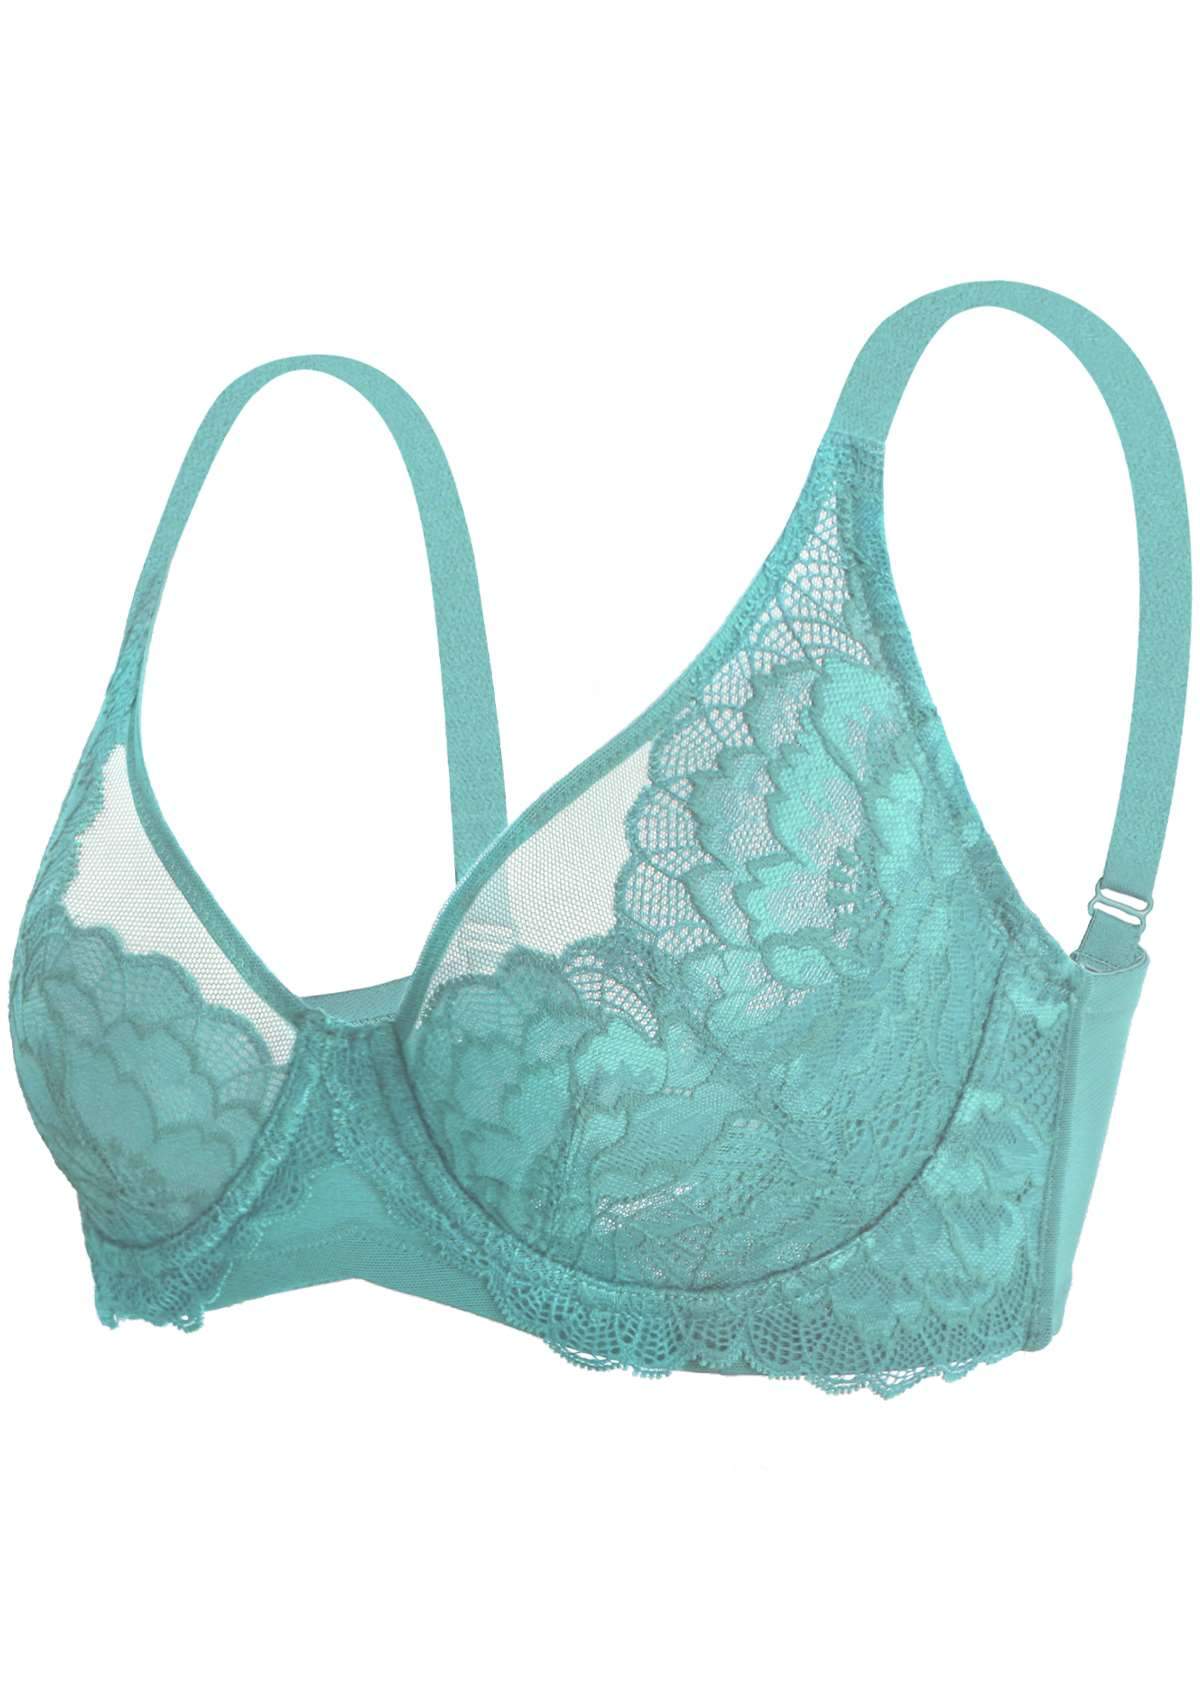 HSIA Paeonia Lace Full Coverage Underwire Non-Padded Uplifting Bra - Teal / 36 / DD/E